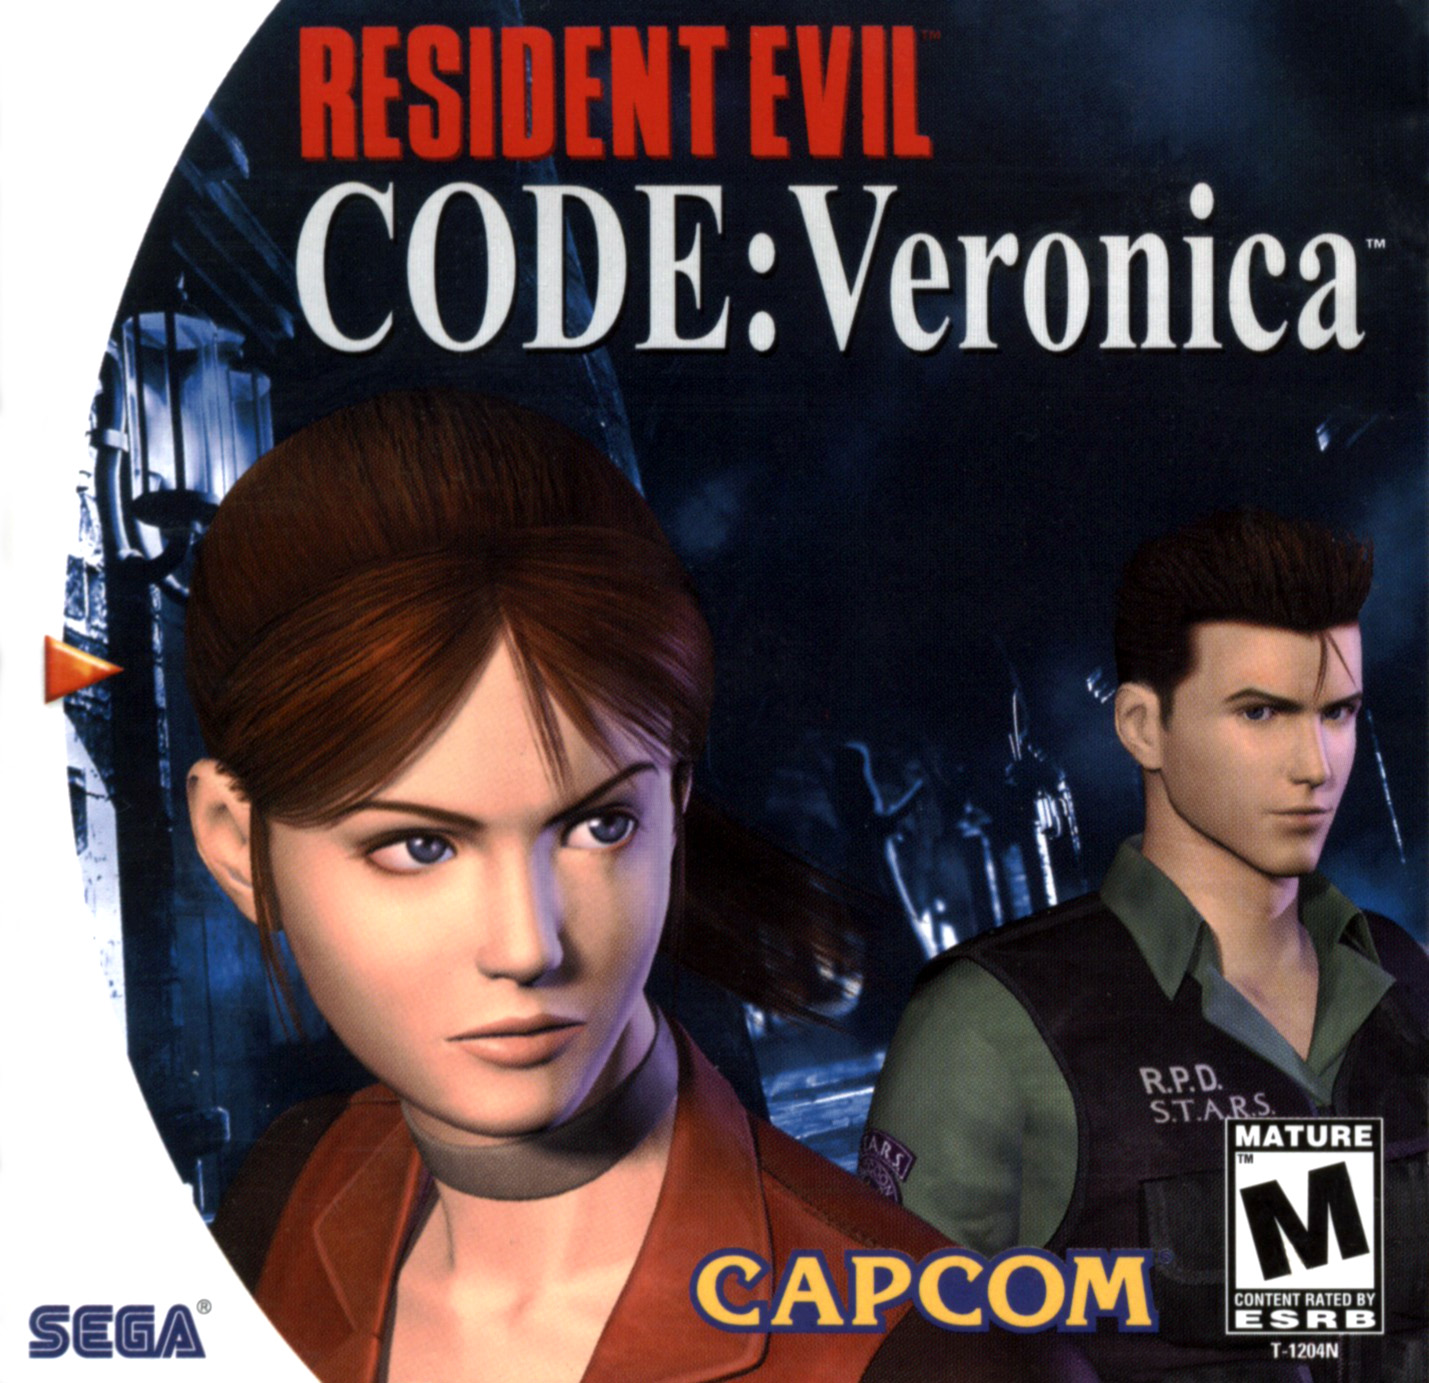 Claire Redfield Actor Would Love To See Resident Evil: Code Veronica  Remake